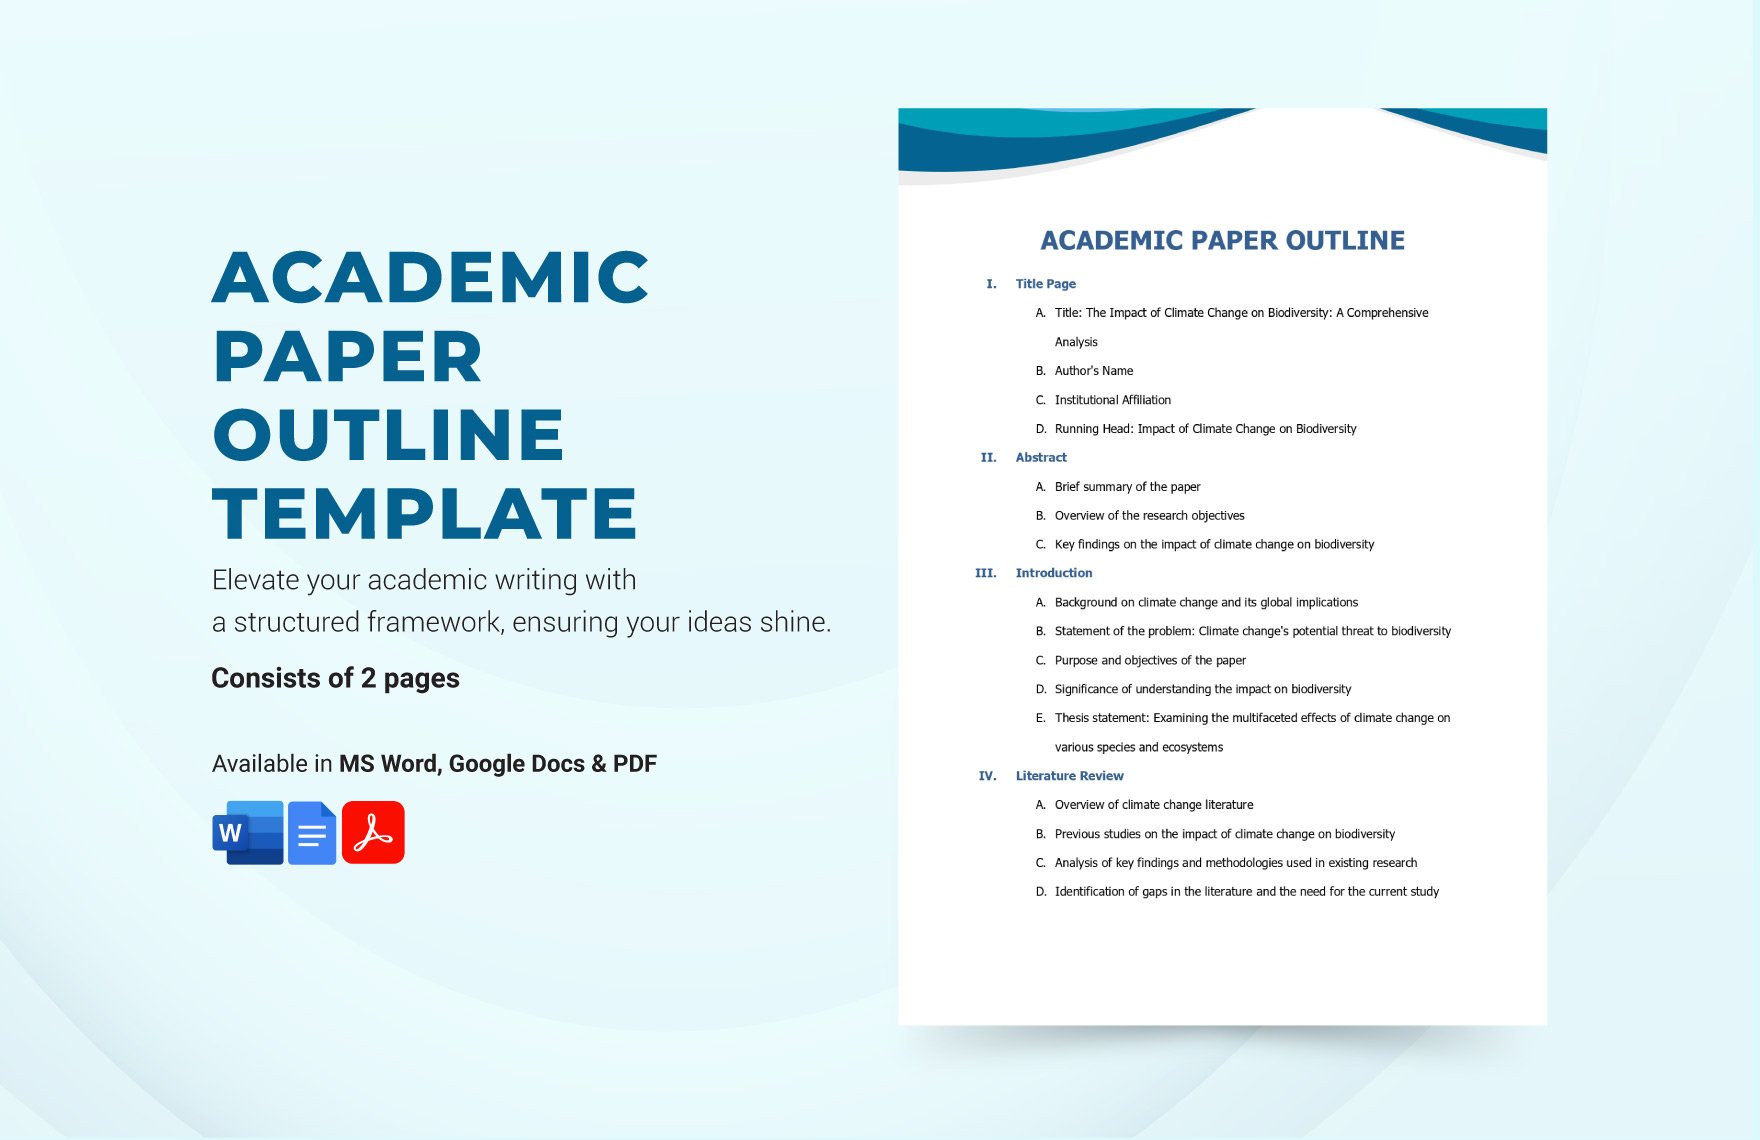 Free Academic Paper Outline Template in Word, Google Docs, PDF